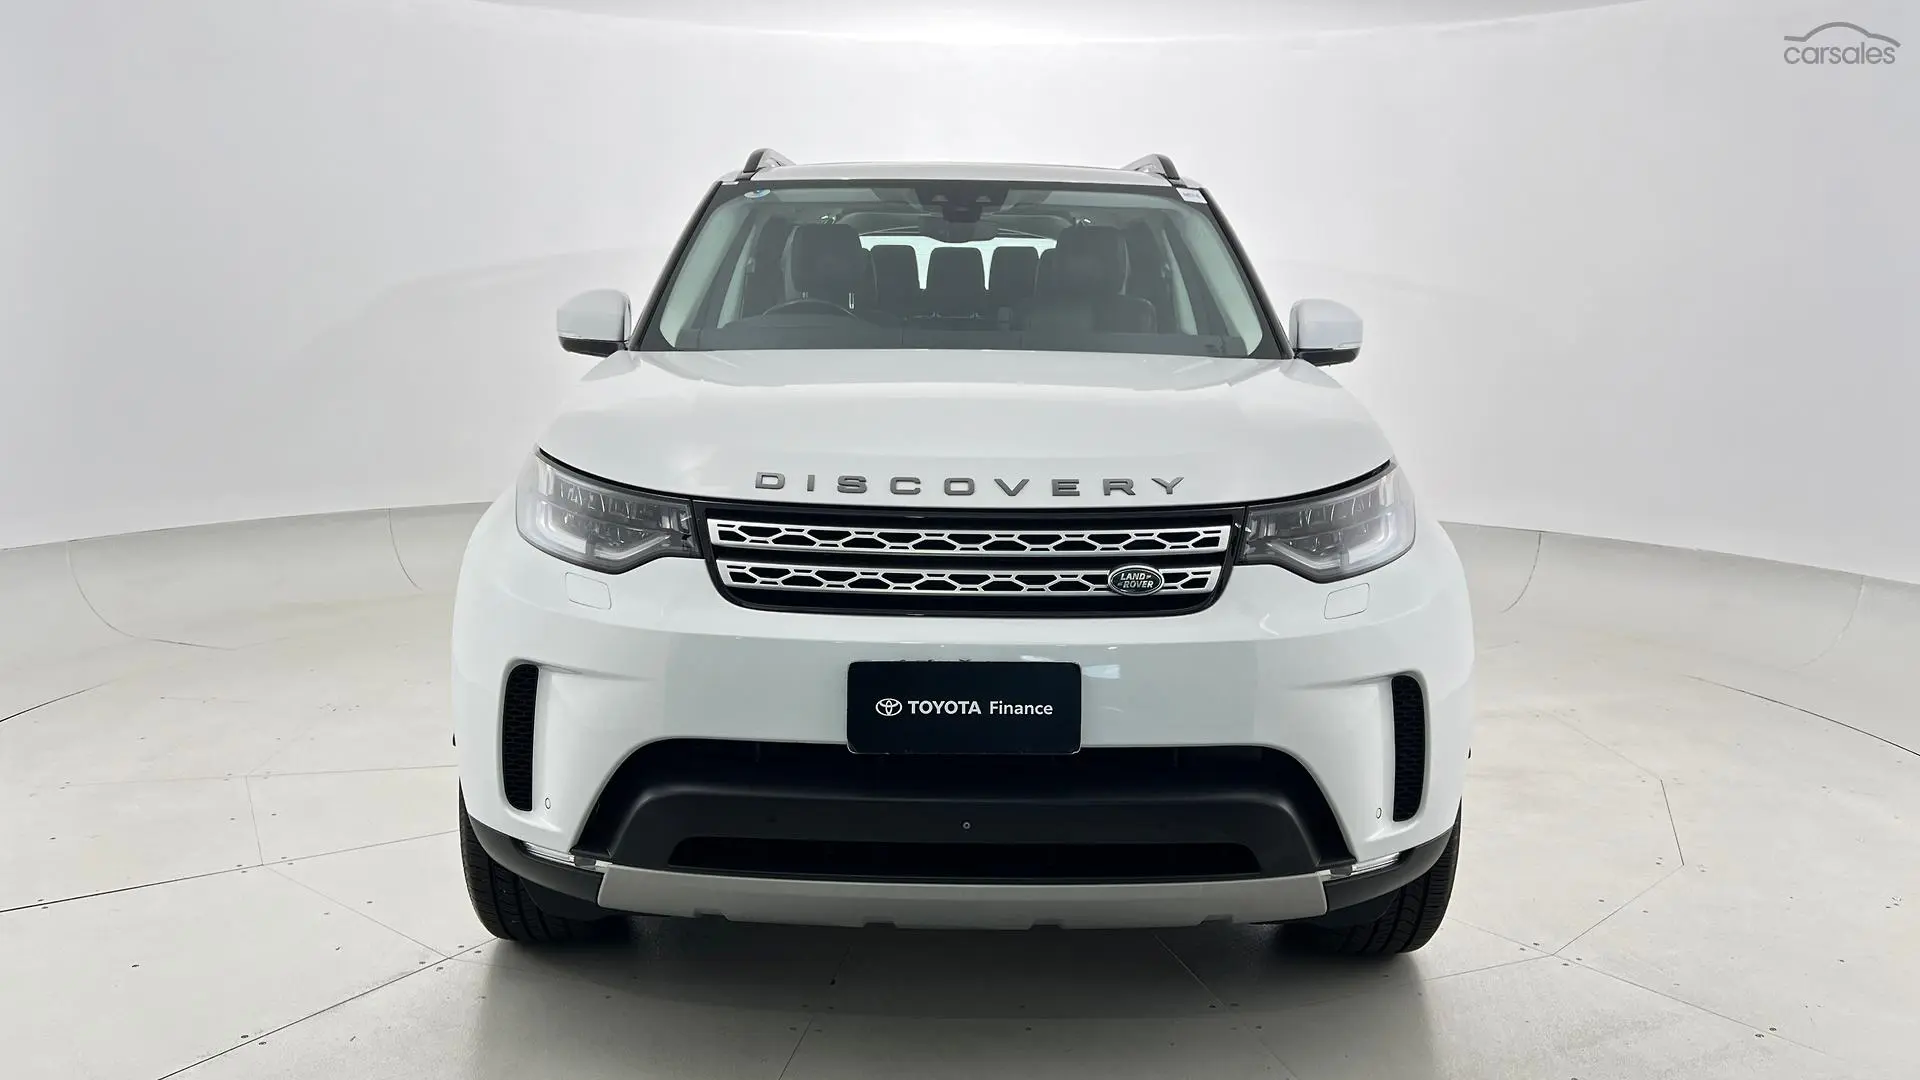 2018 Land Rover Discovery Image 10